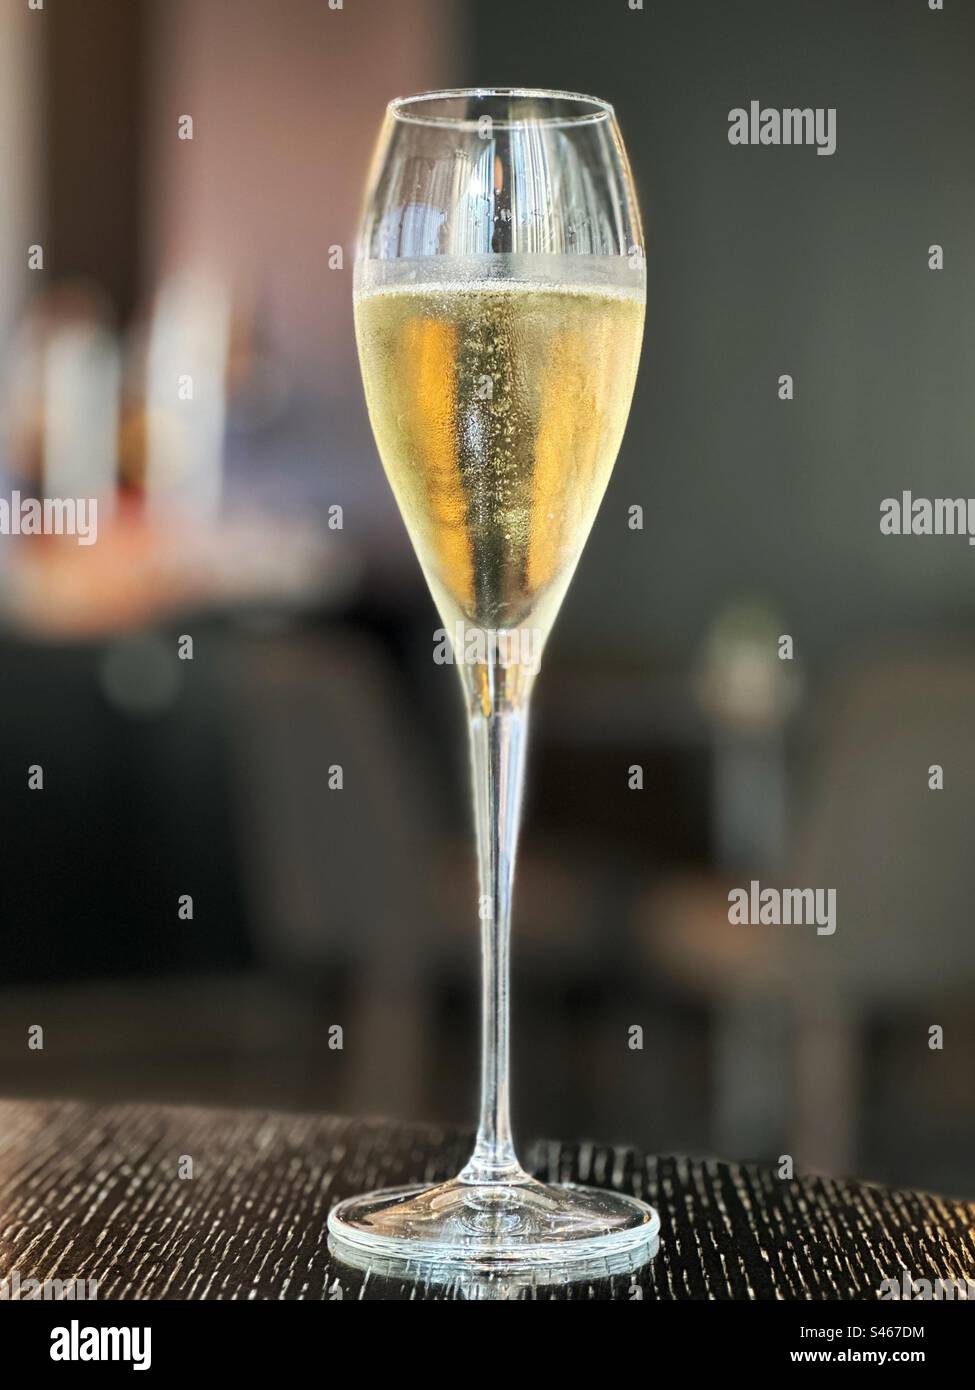 Flute glass of champagne isolated on a plain dark background Stock Photo